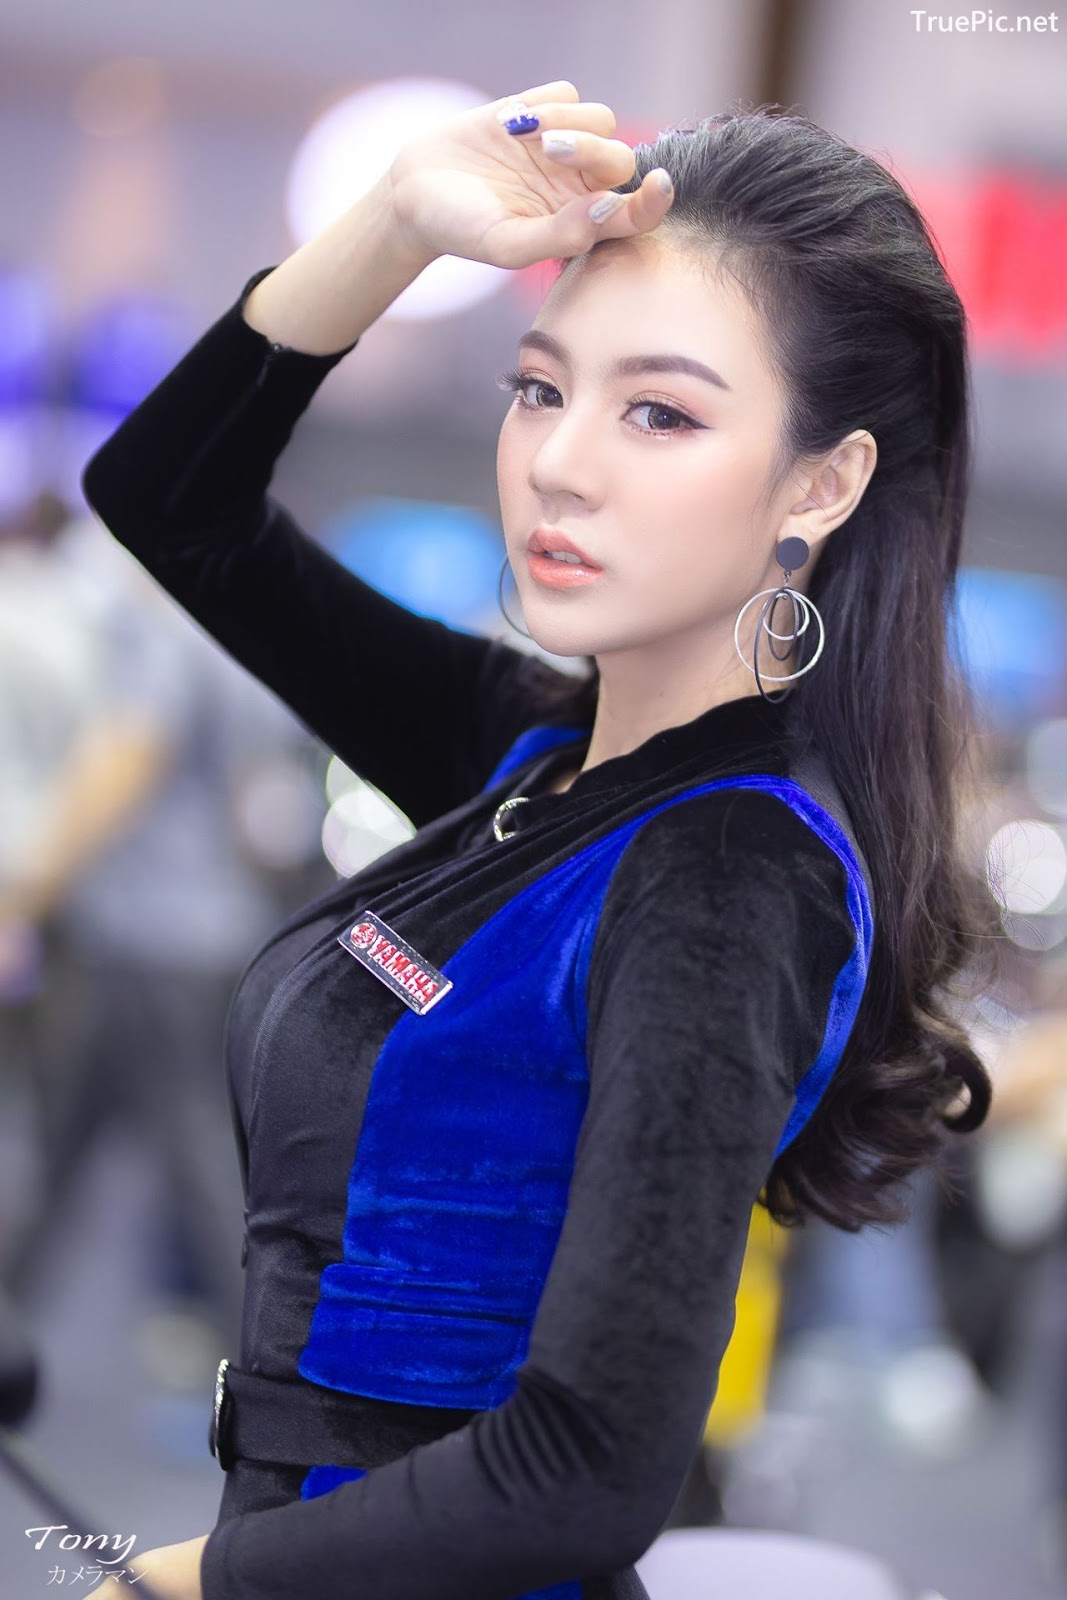 Image-Thailand-Hot-Model-Thai-Racing-Girl-At-Motor-Expo-2018-TruePic.net- Picture-41